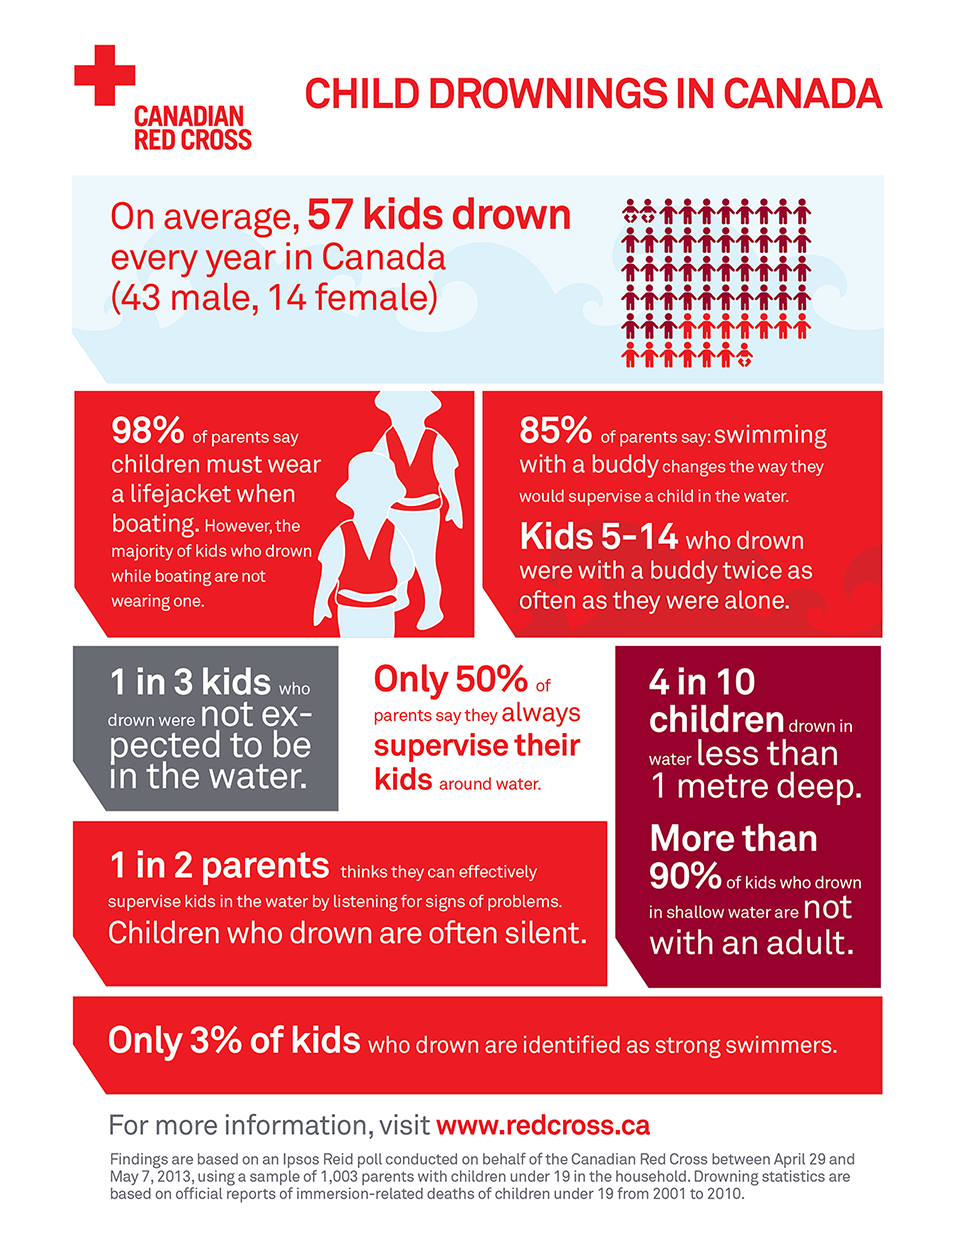 Canadian Red Cross Infographic